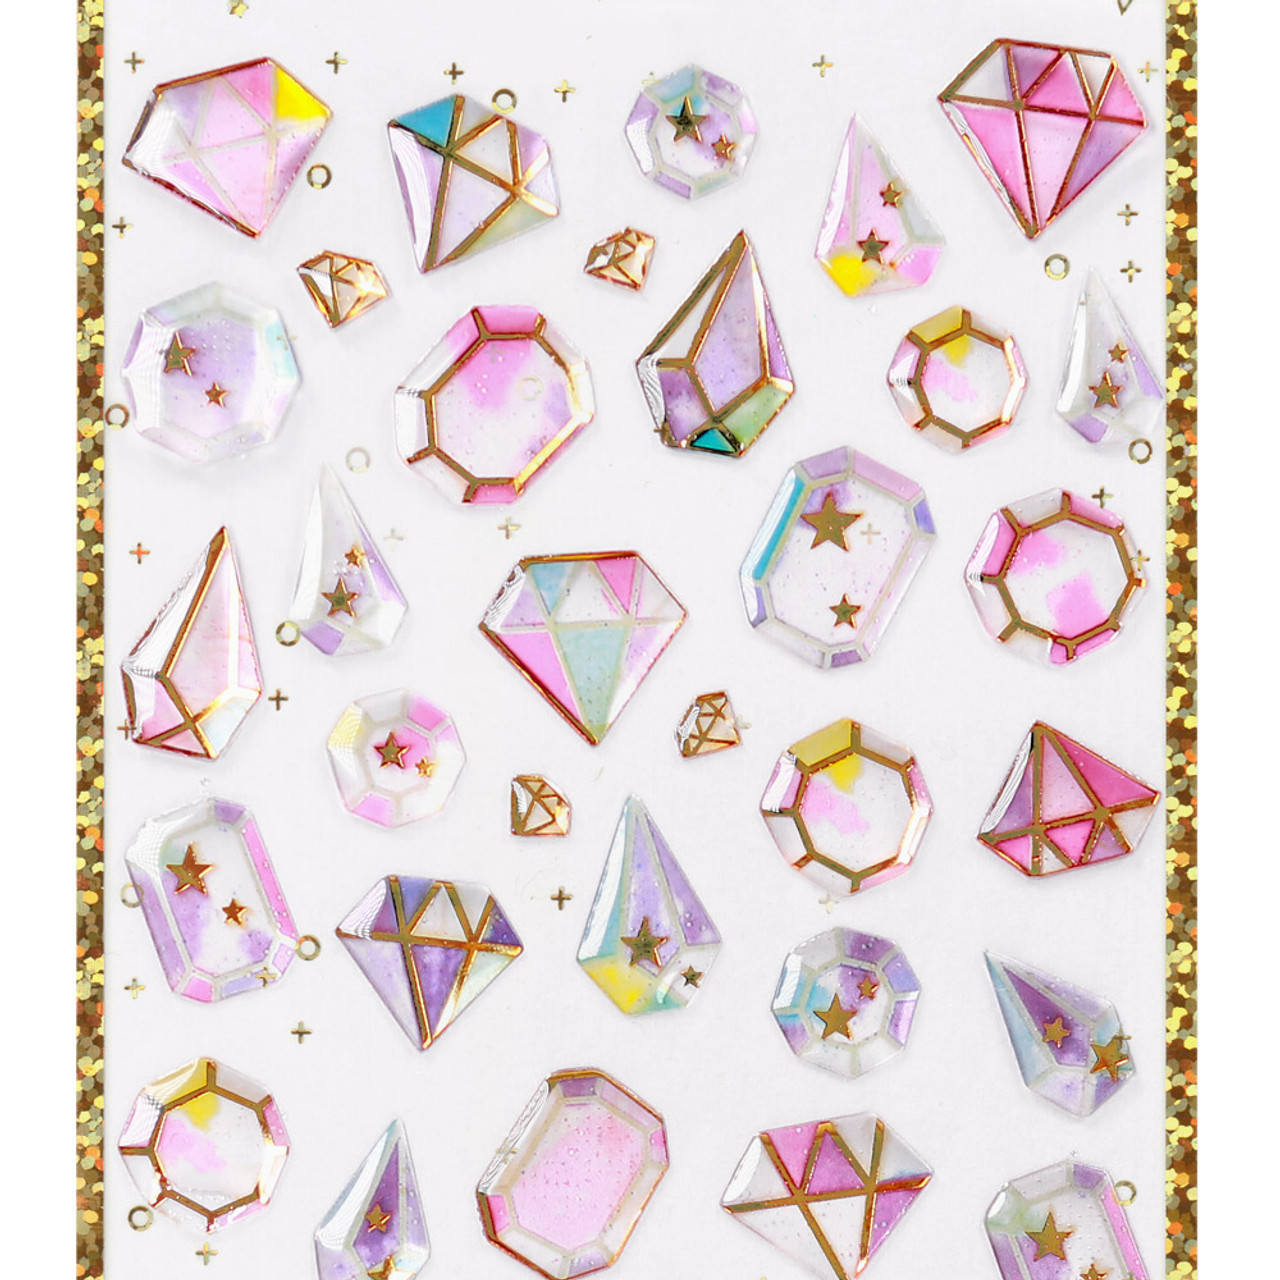 Shining magic 3d stickers( glitter), The Gifts Quest